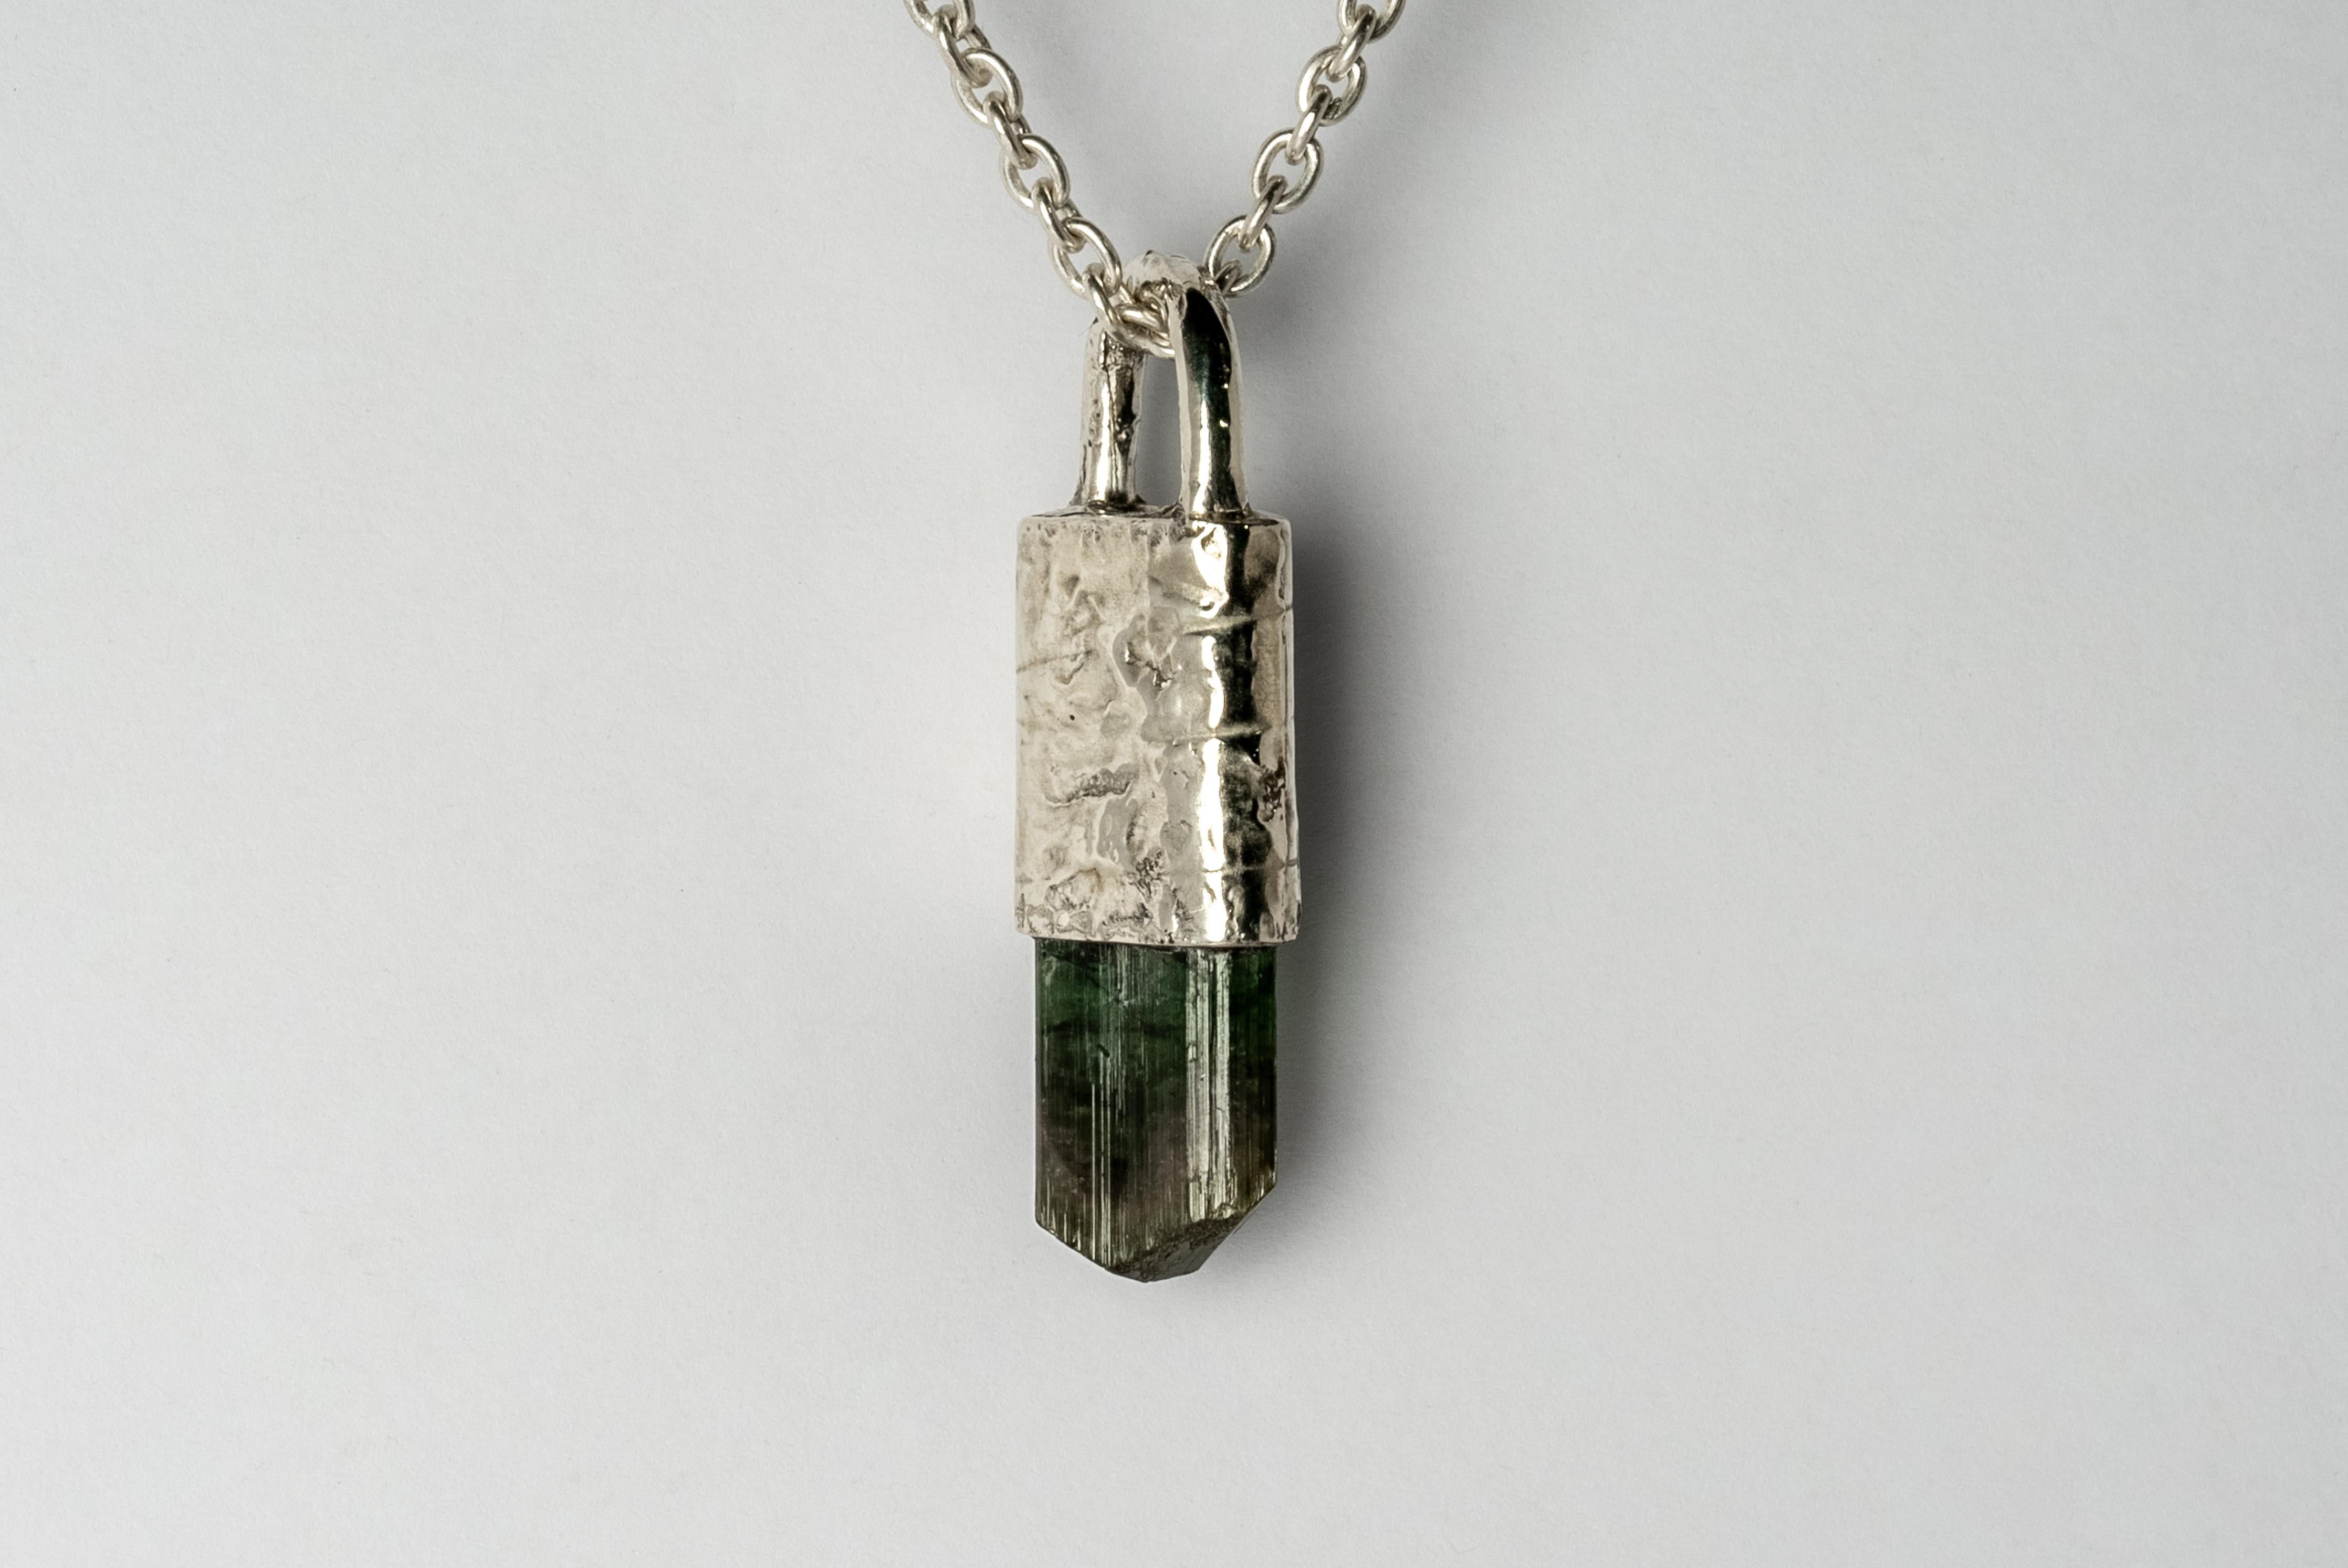 Necklace in matte sterling silver with fused layer of 10k white gold and a rough elbaite, range colors of tourmaline. The Talisman series is an exploration into the power of natural crystals. The title Specimen signifies a particular class of